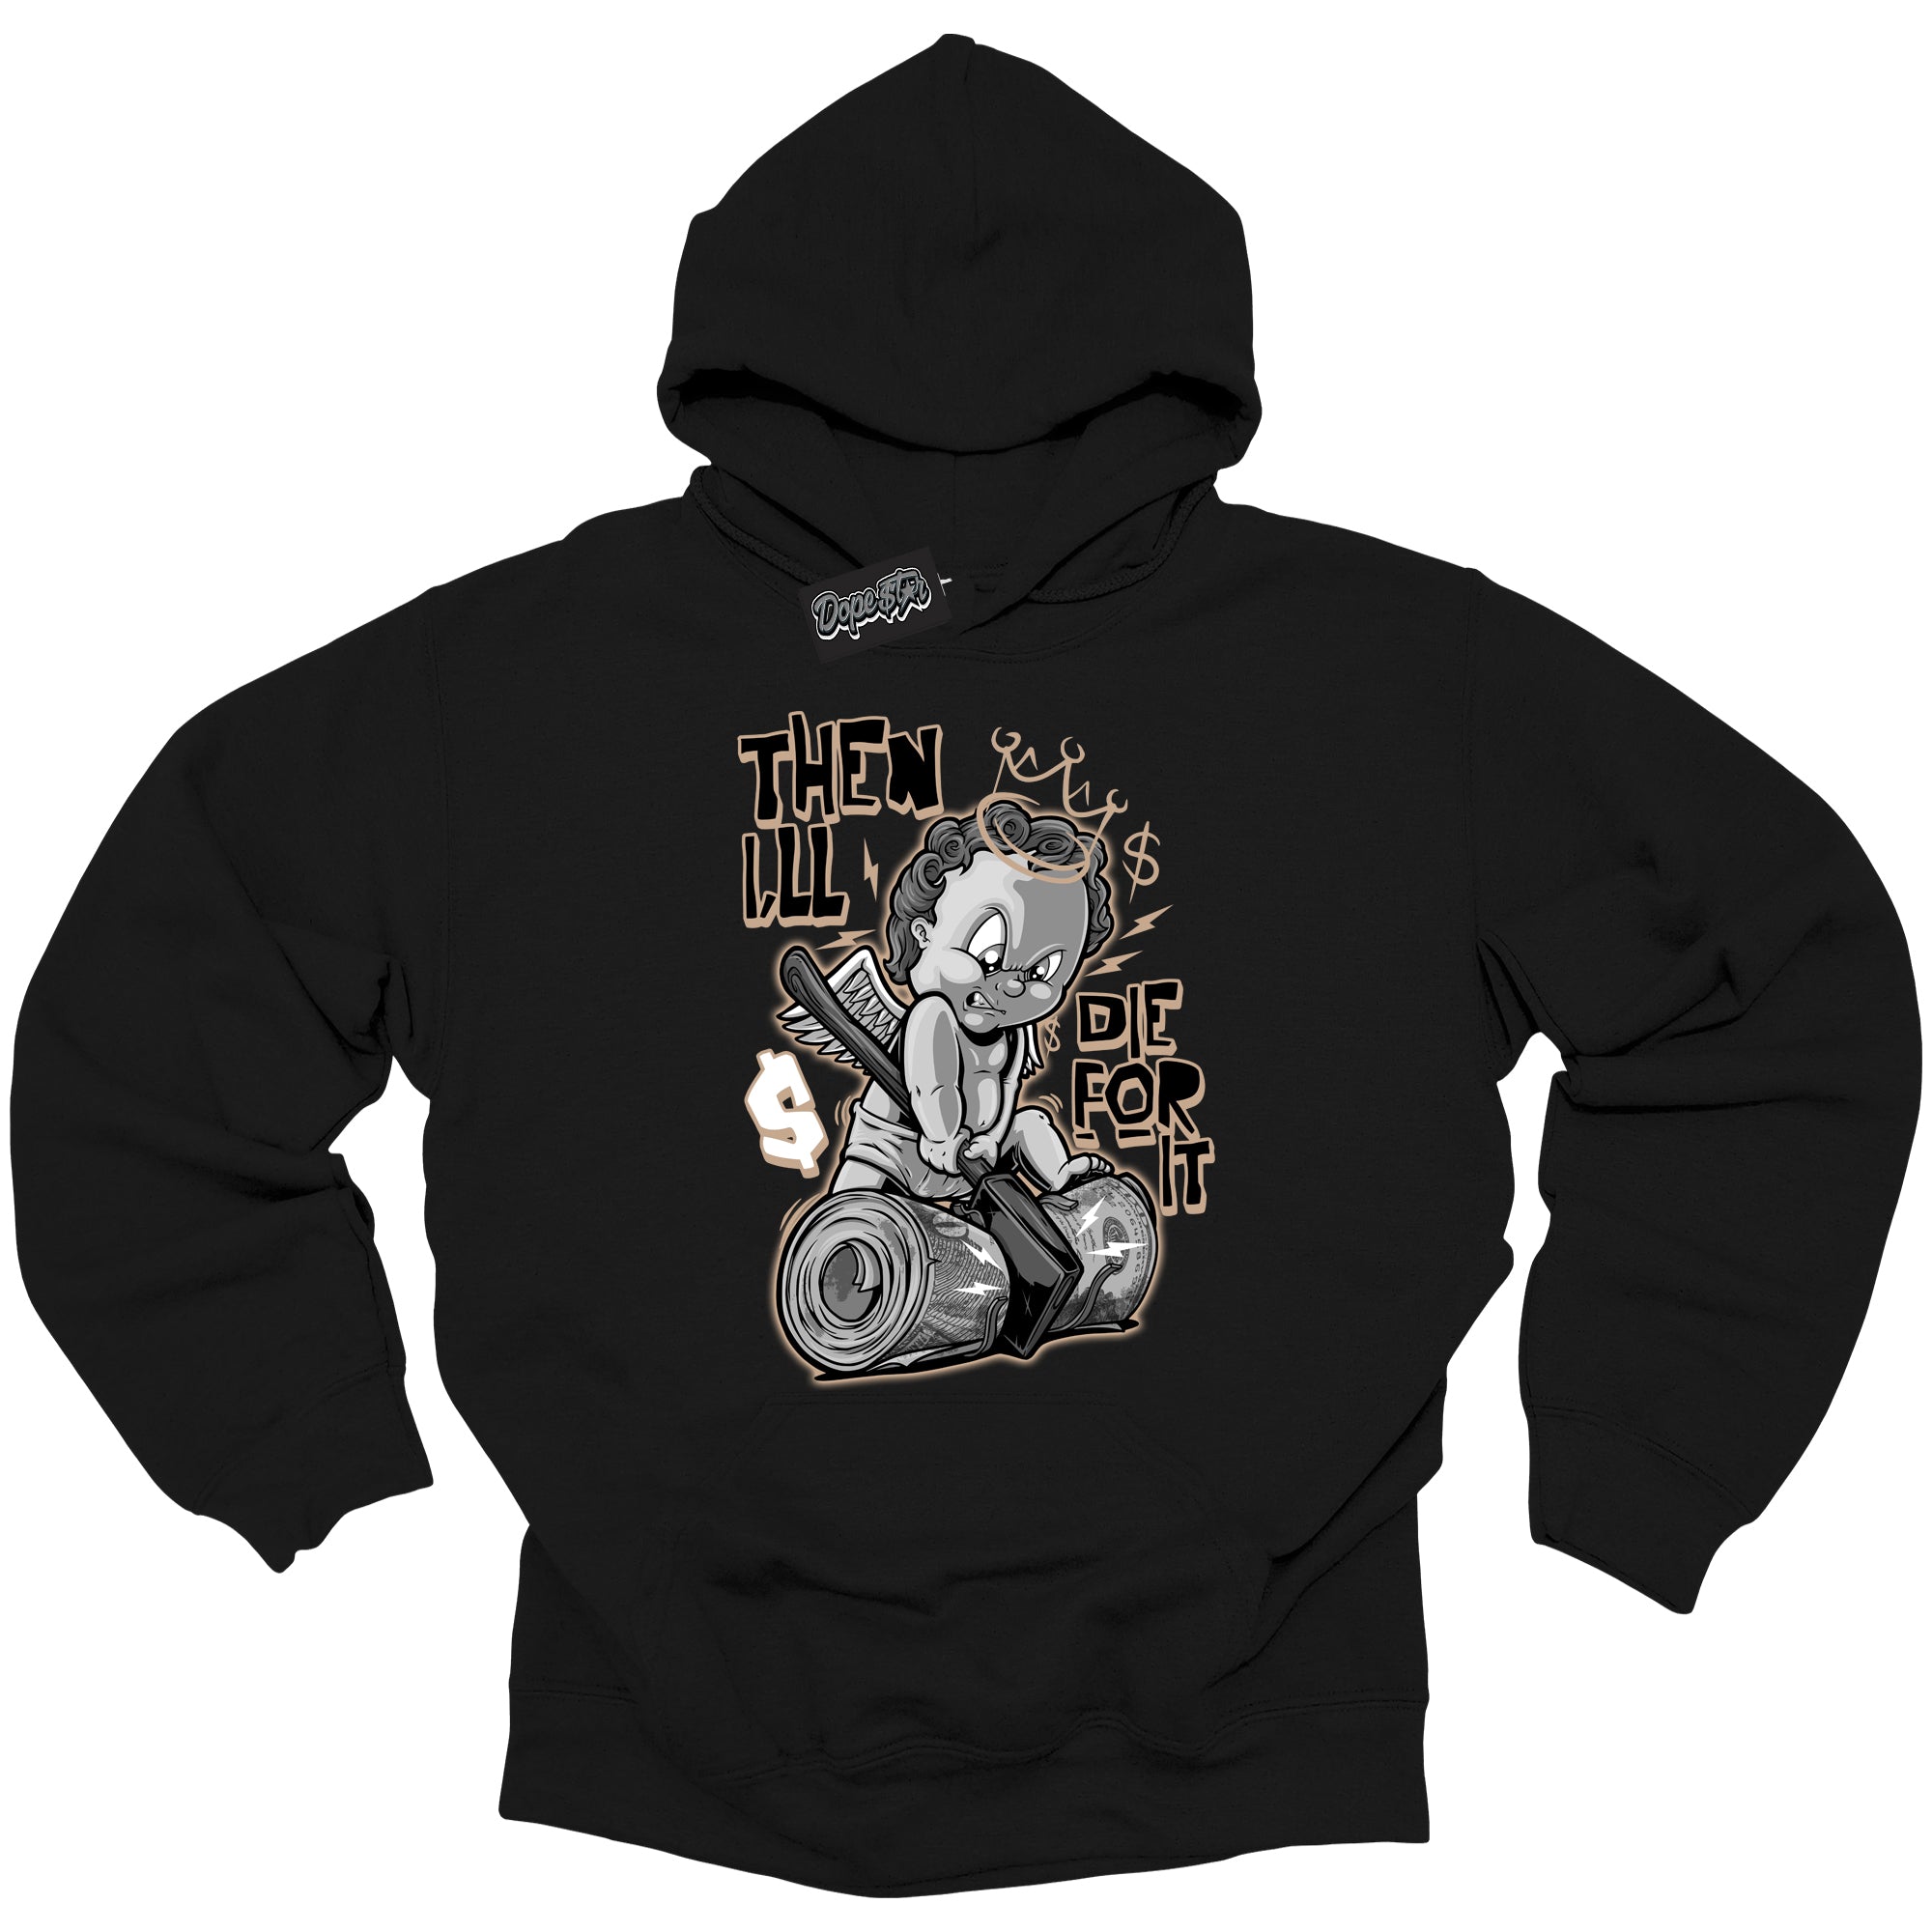 Cool Black Graphic DopeStar Hoodie with “ Then I'll “ print, that perfectly matches Palomino 1s sneakers